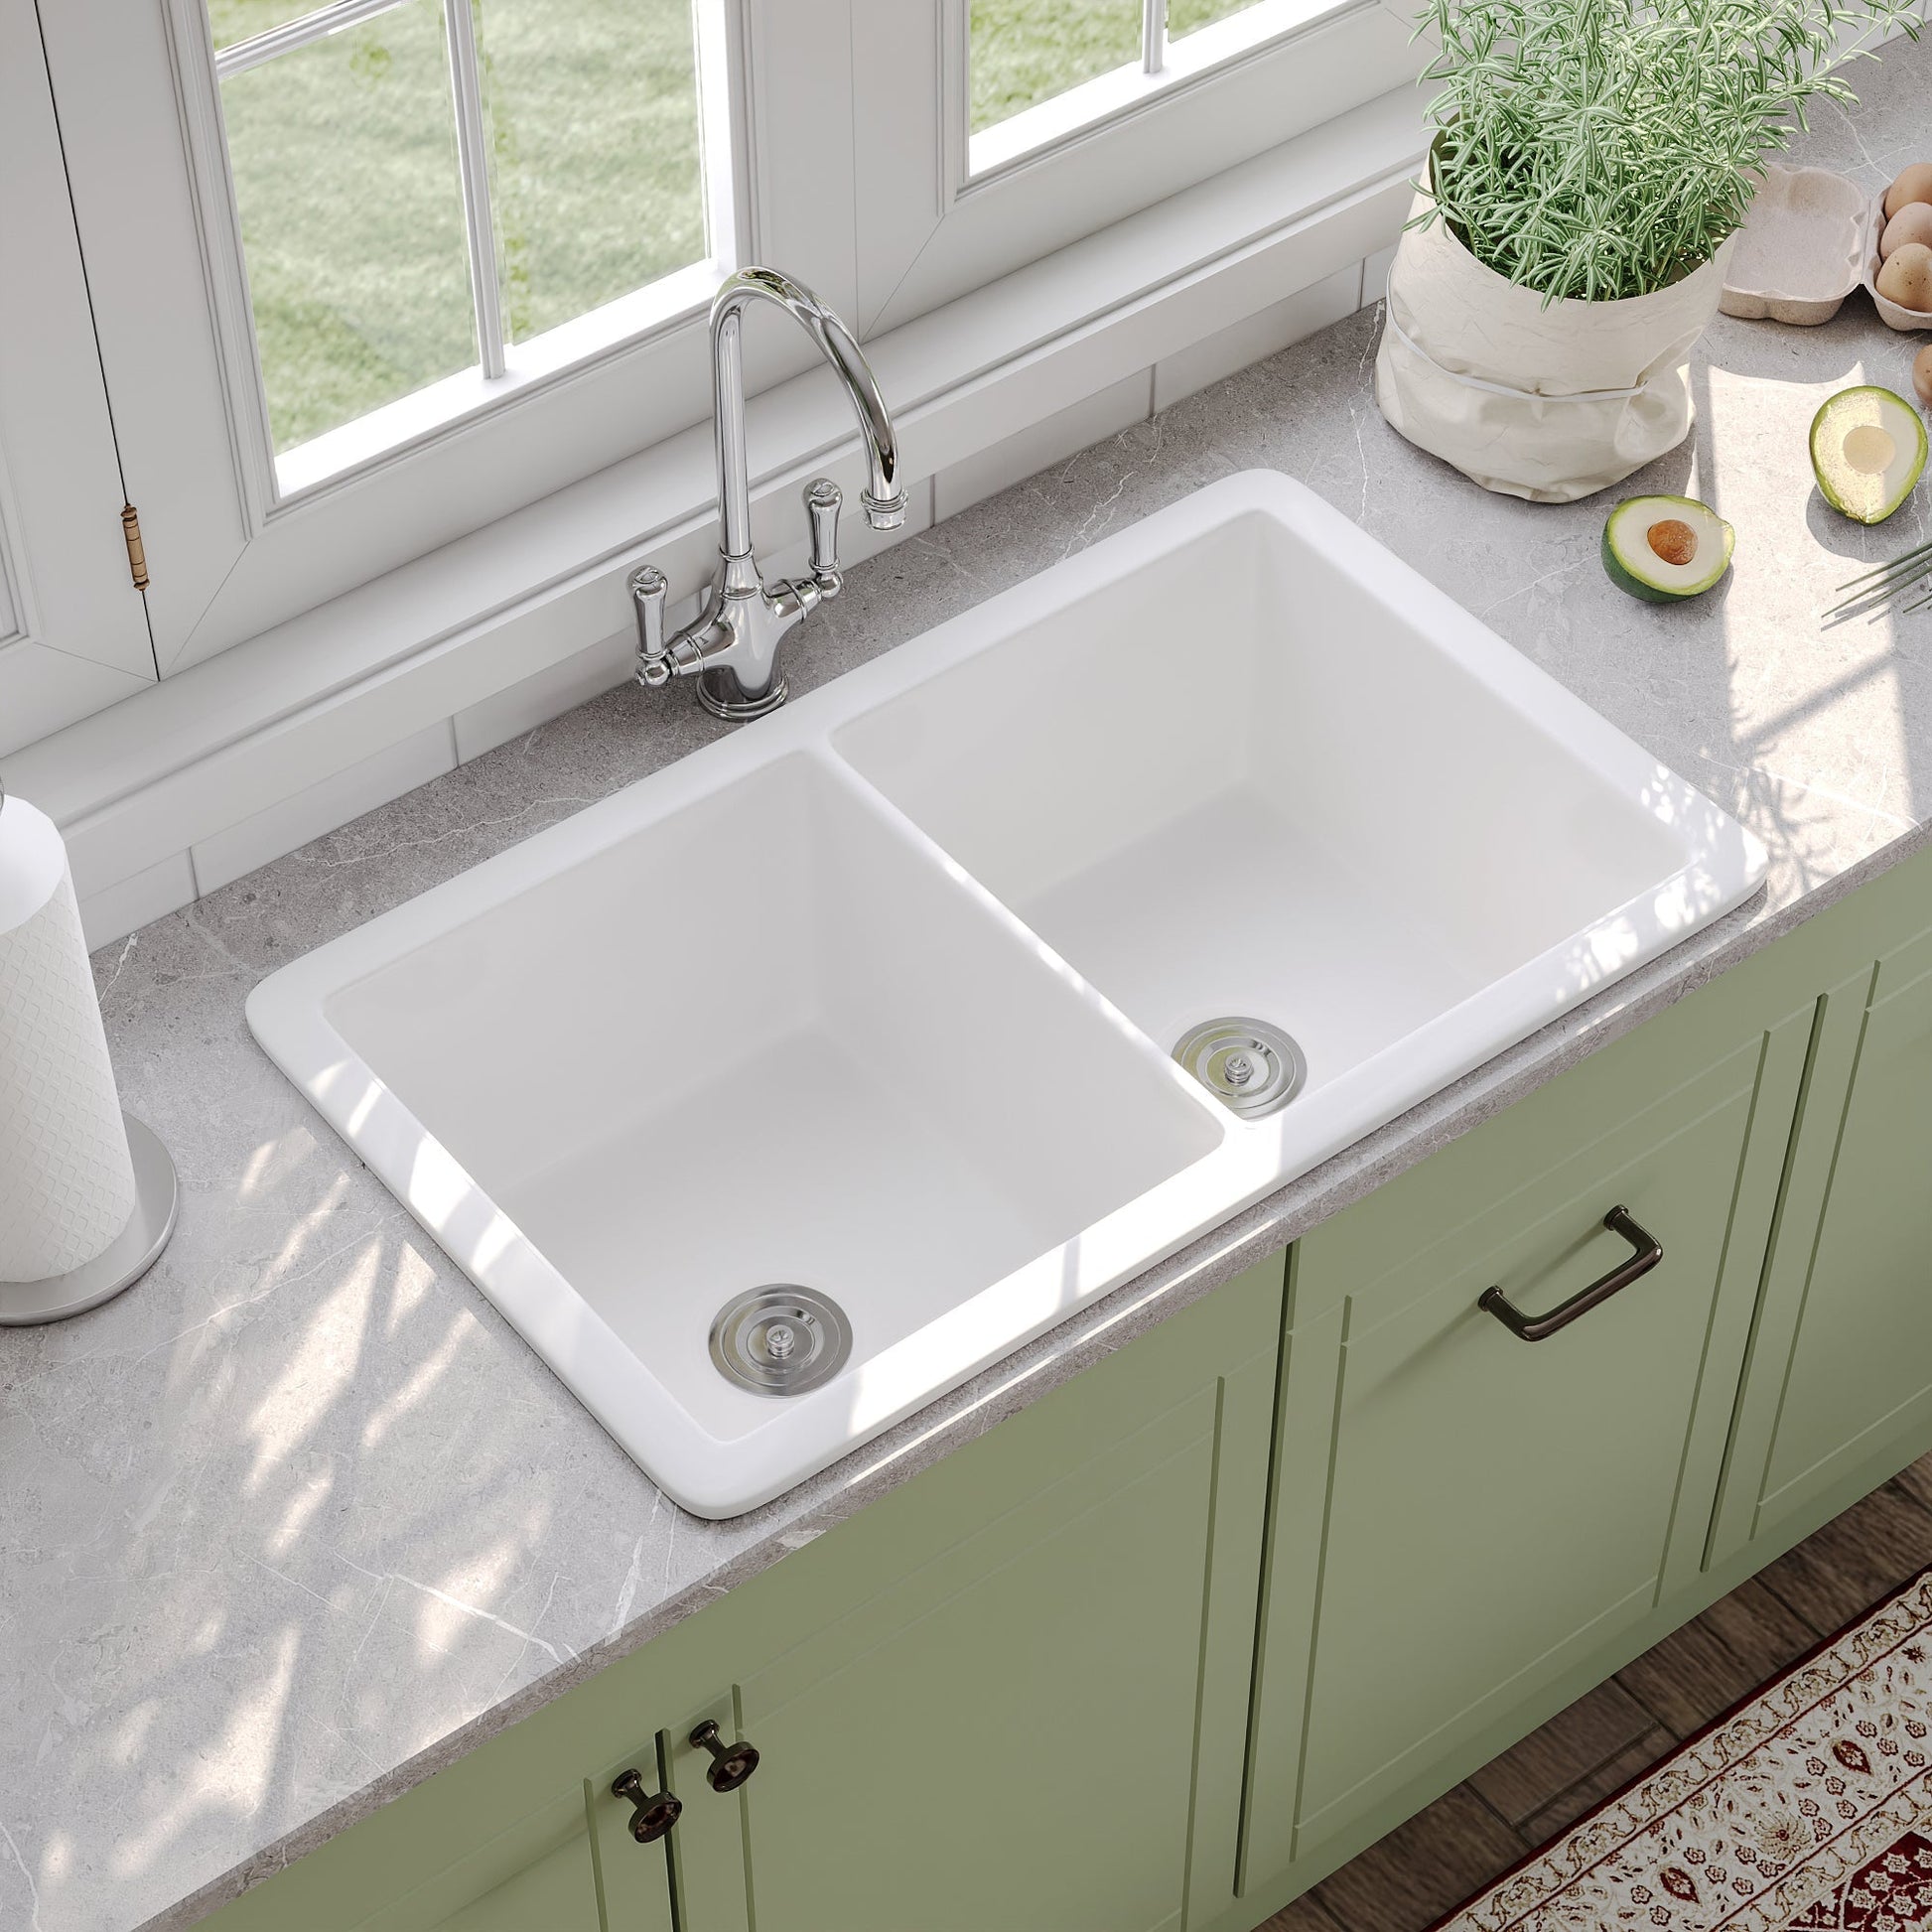 DeerValley Glen 32" L x 19" W DV-1K513 Rectangle White Fireclay Large Capacity Undermount or Topmount Farmhouse Kitchen Sink With Basket Strainer Drain and Grid